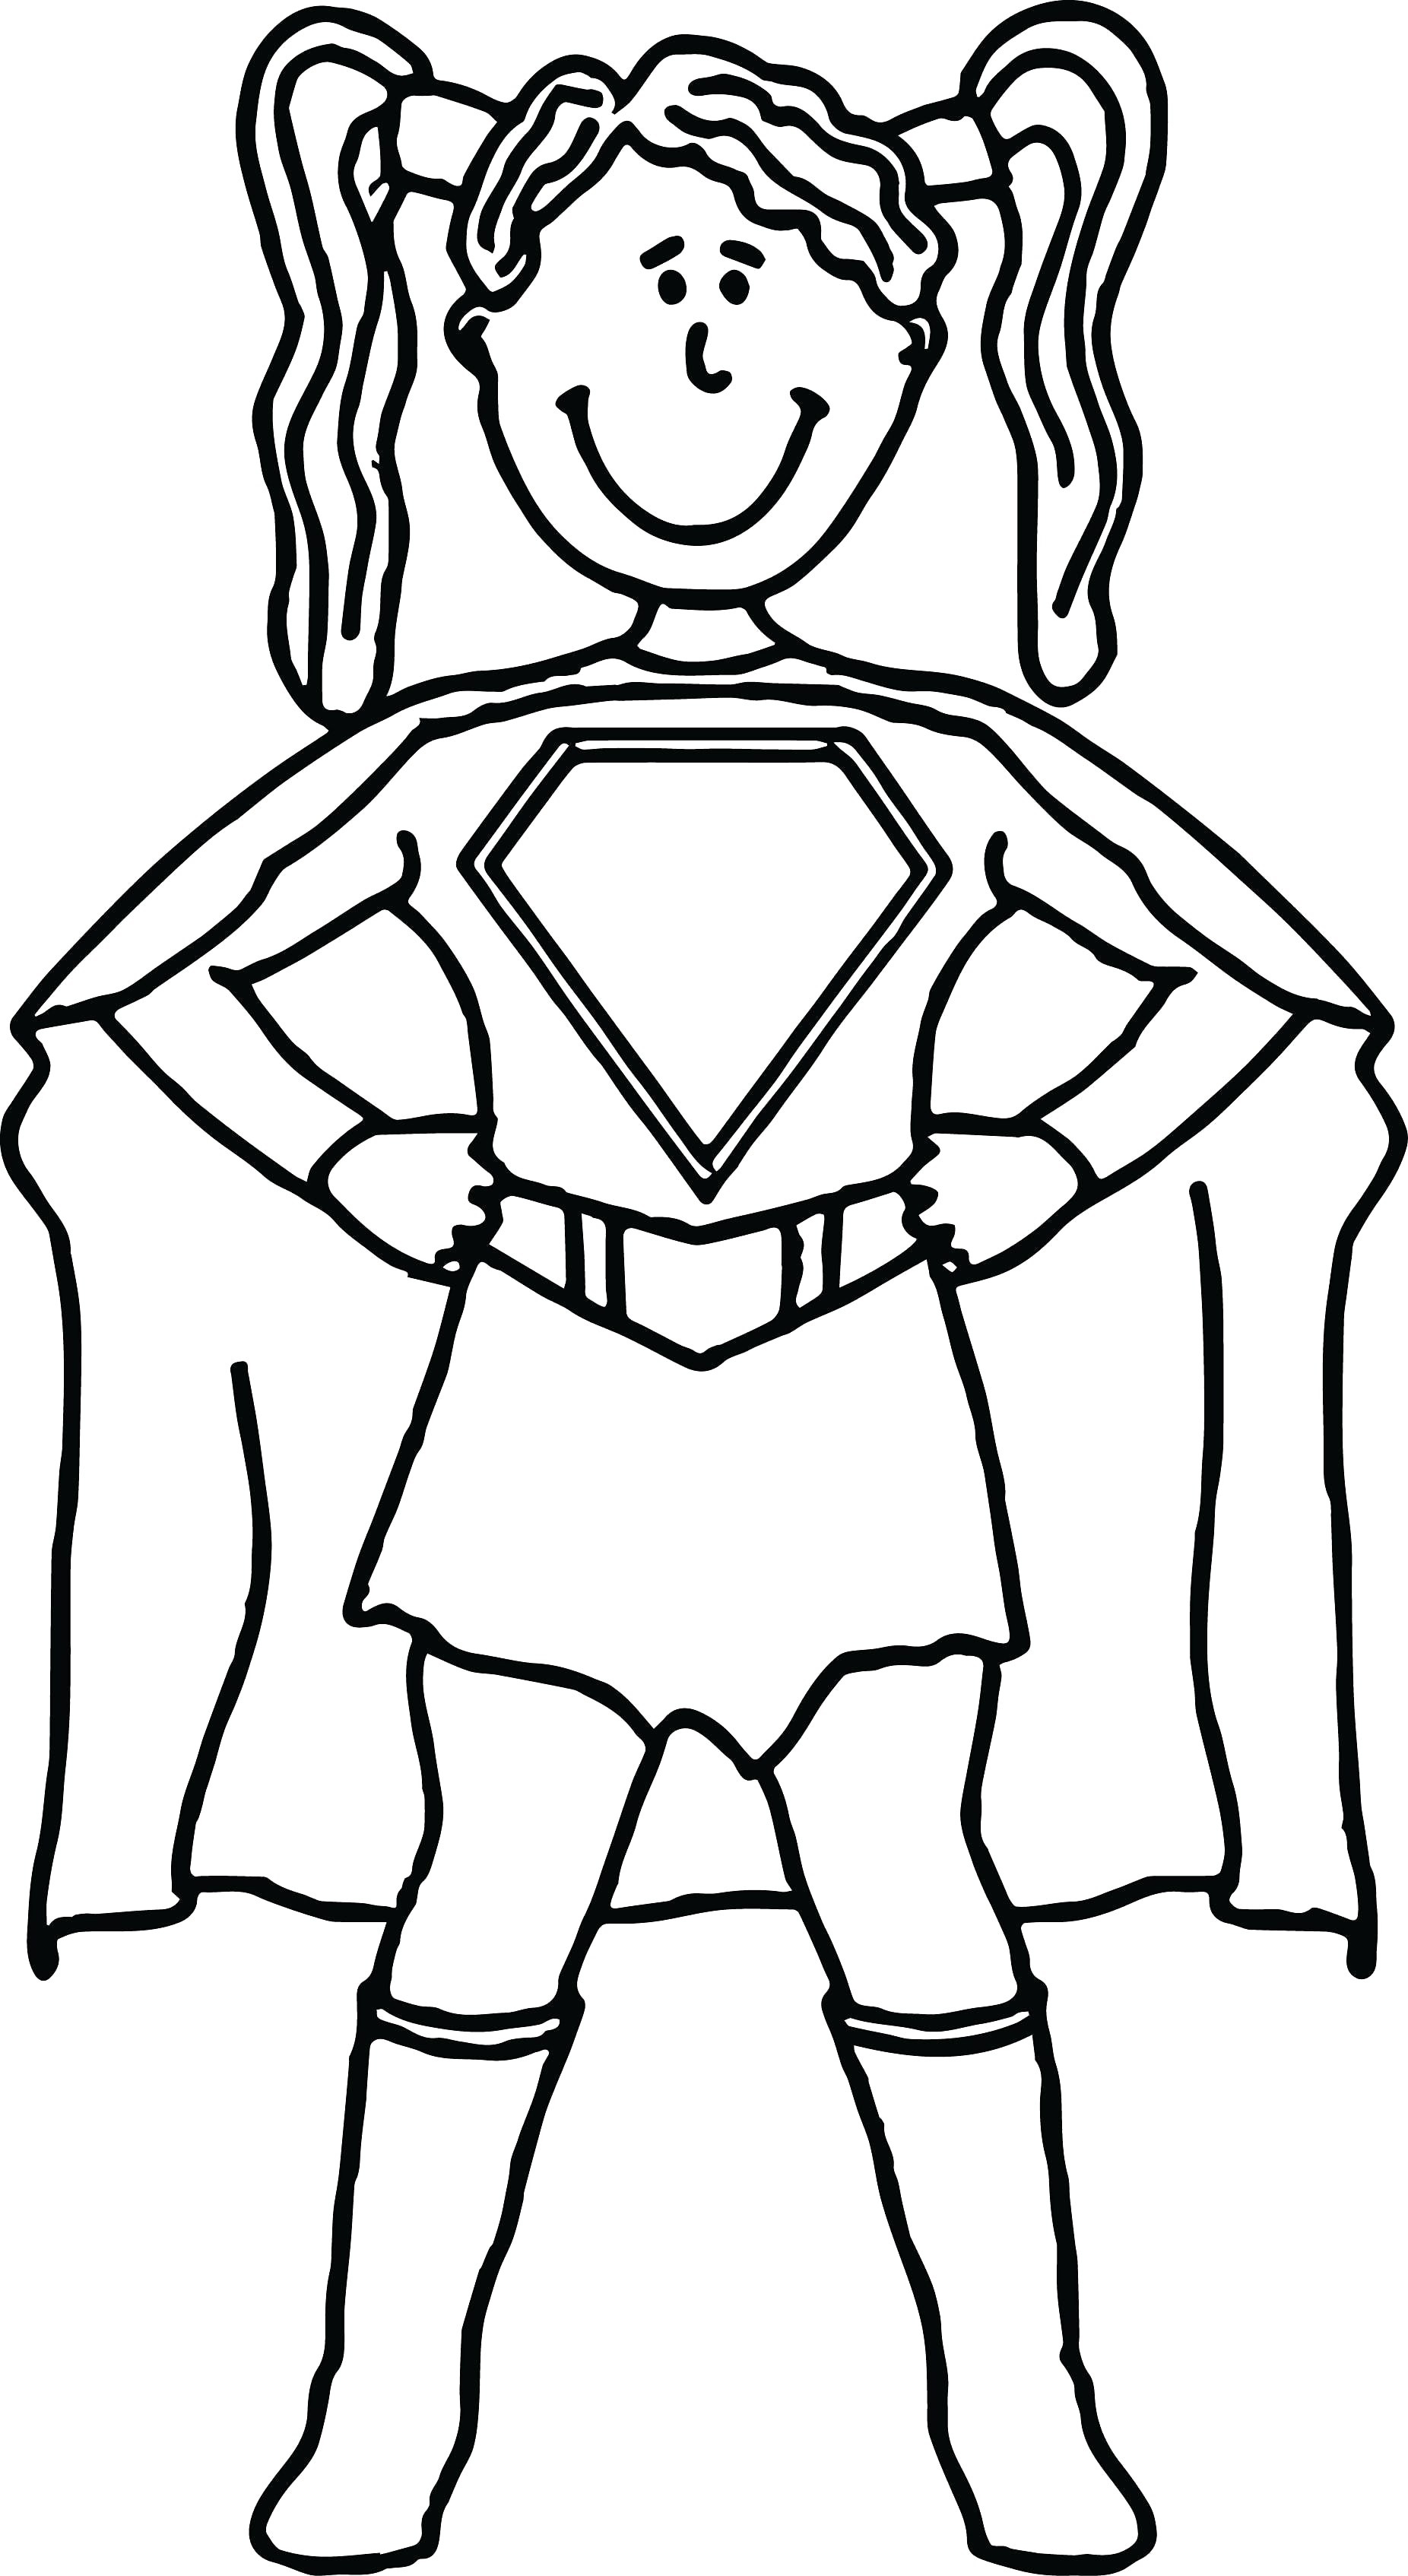 Simple Superhero Coloring Pages Coloring Pages